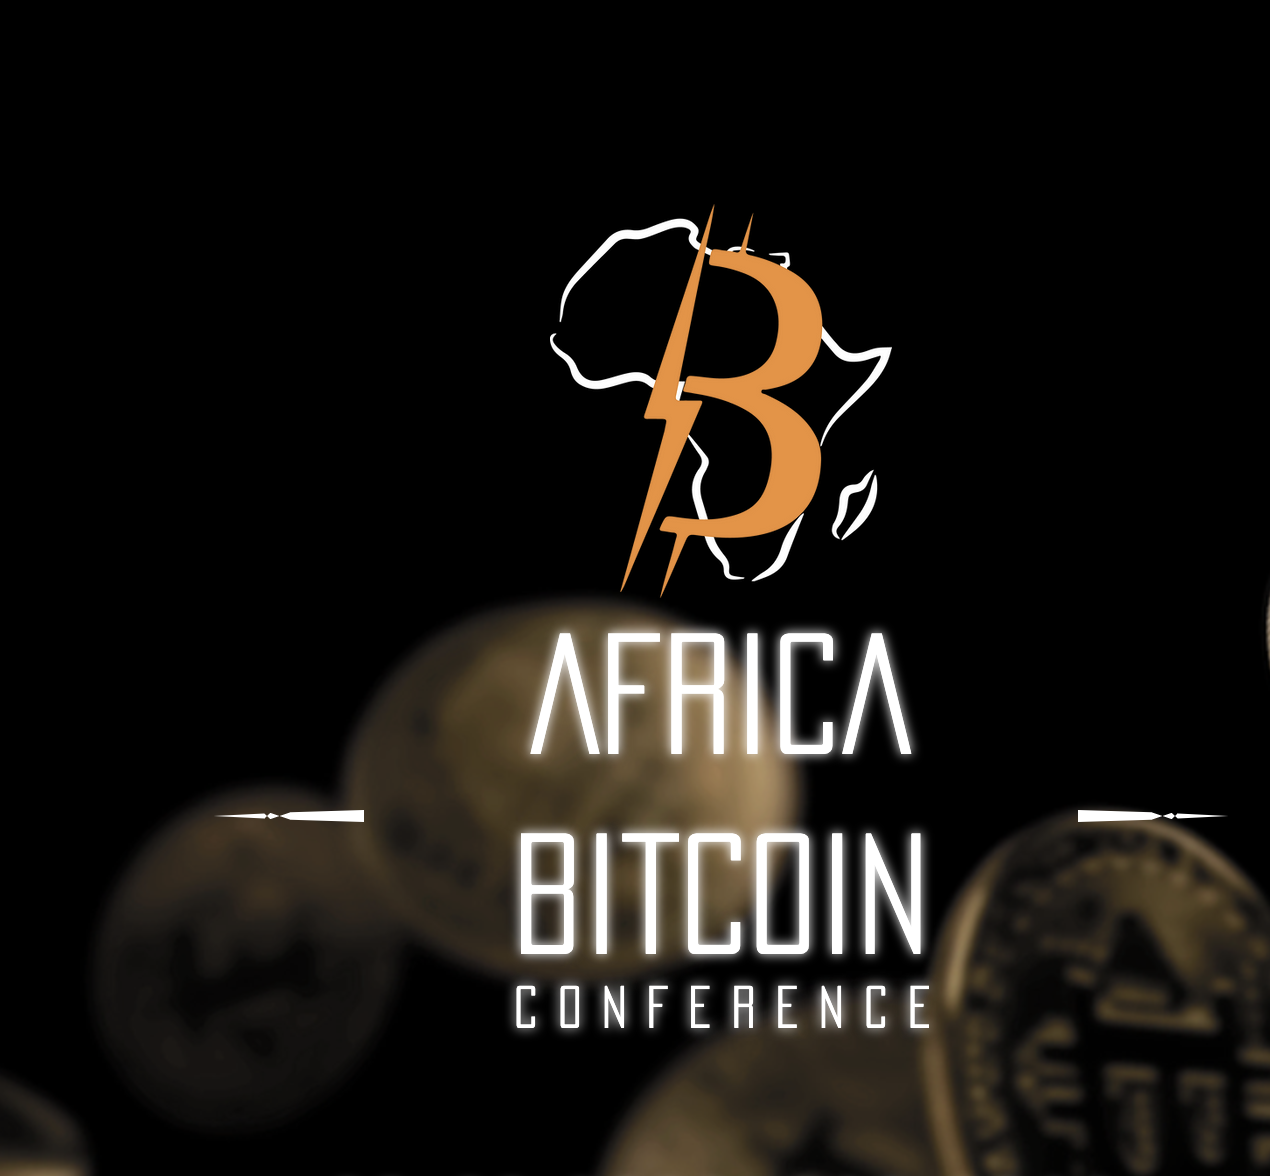 A Powerhouse of Bitcoiners Meet in Africa